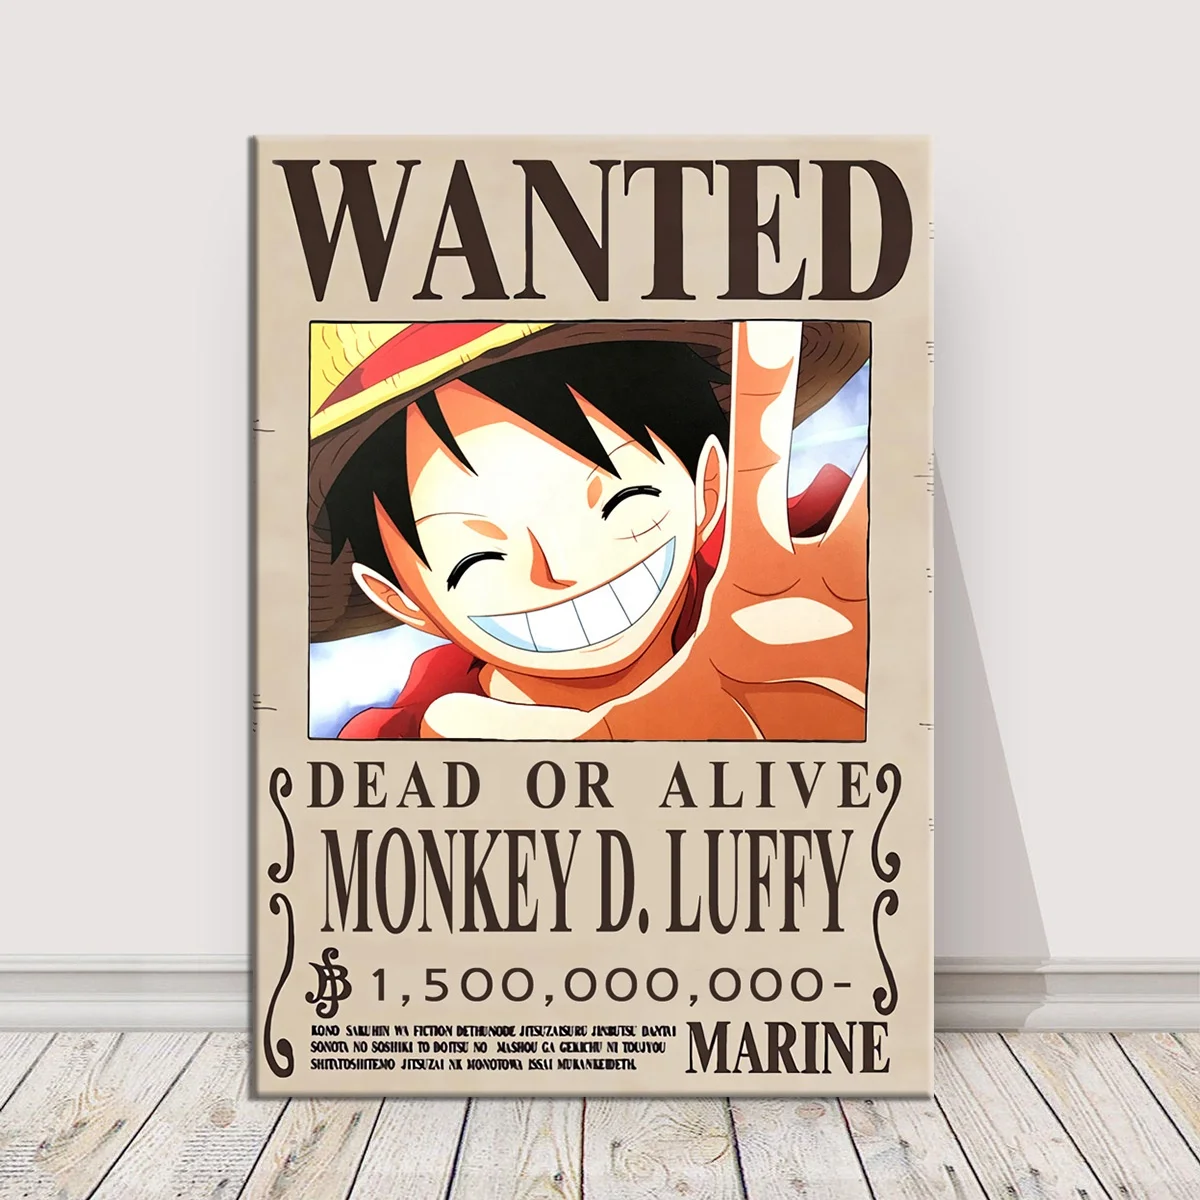 151designs Anime One Piece Wanted Poster Manga Character Luffy Zoro Nami Chopper Robin Franky Oil Painting Canvas Anime Decor Buy One Piece Wanted Poster Luffy Zoro Poster Anime Decor Product On Alibaba Com